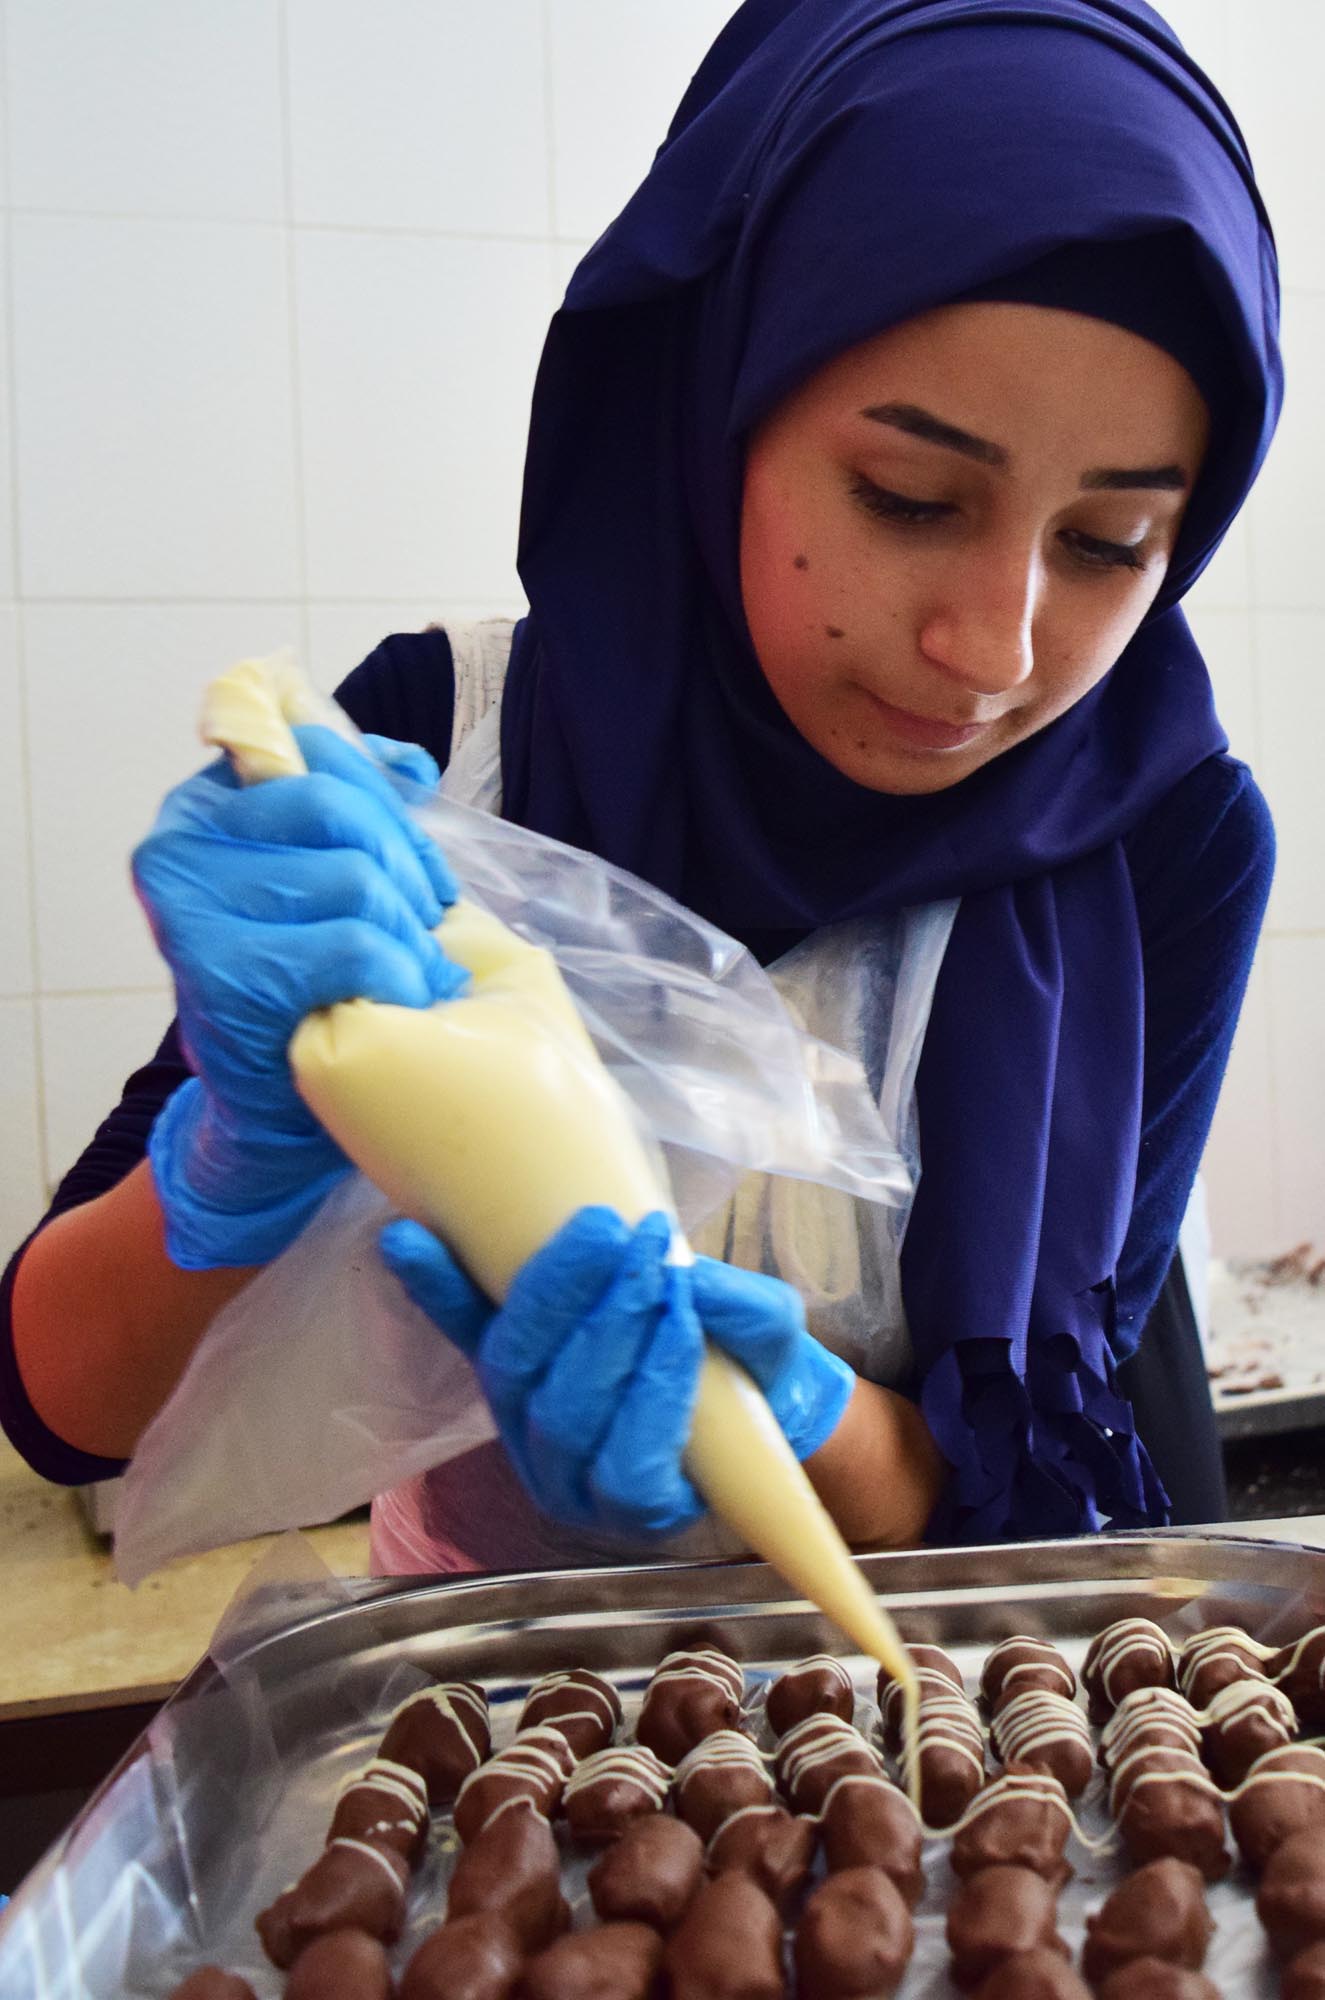 Anera's job skills courses teach Syrian refugee youth a variety of skills to help them get jobs in Lebanon.